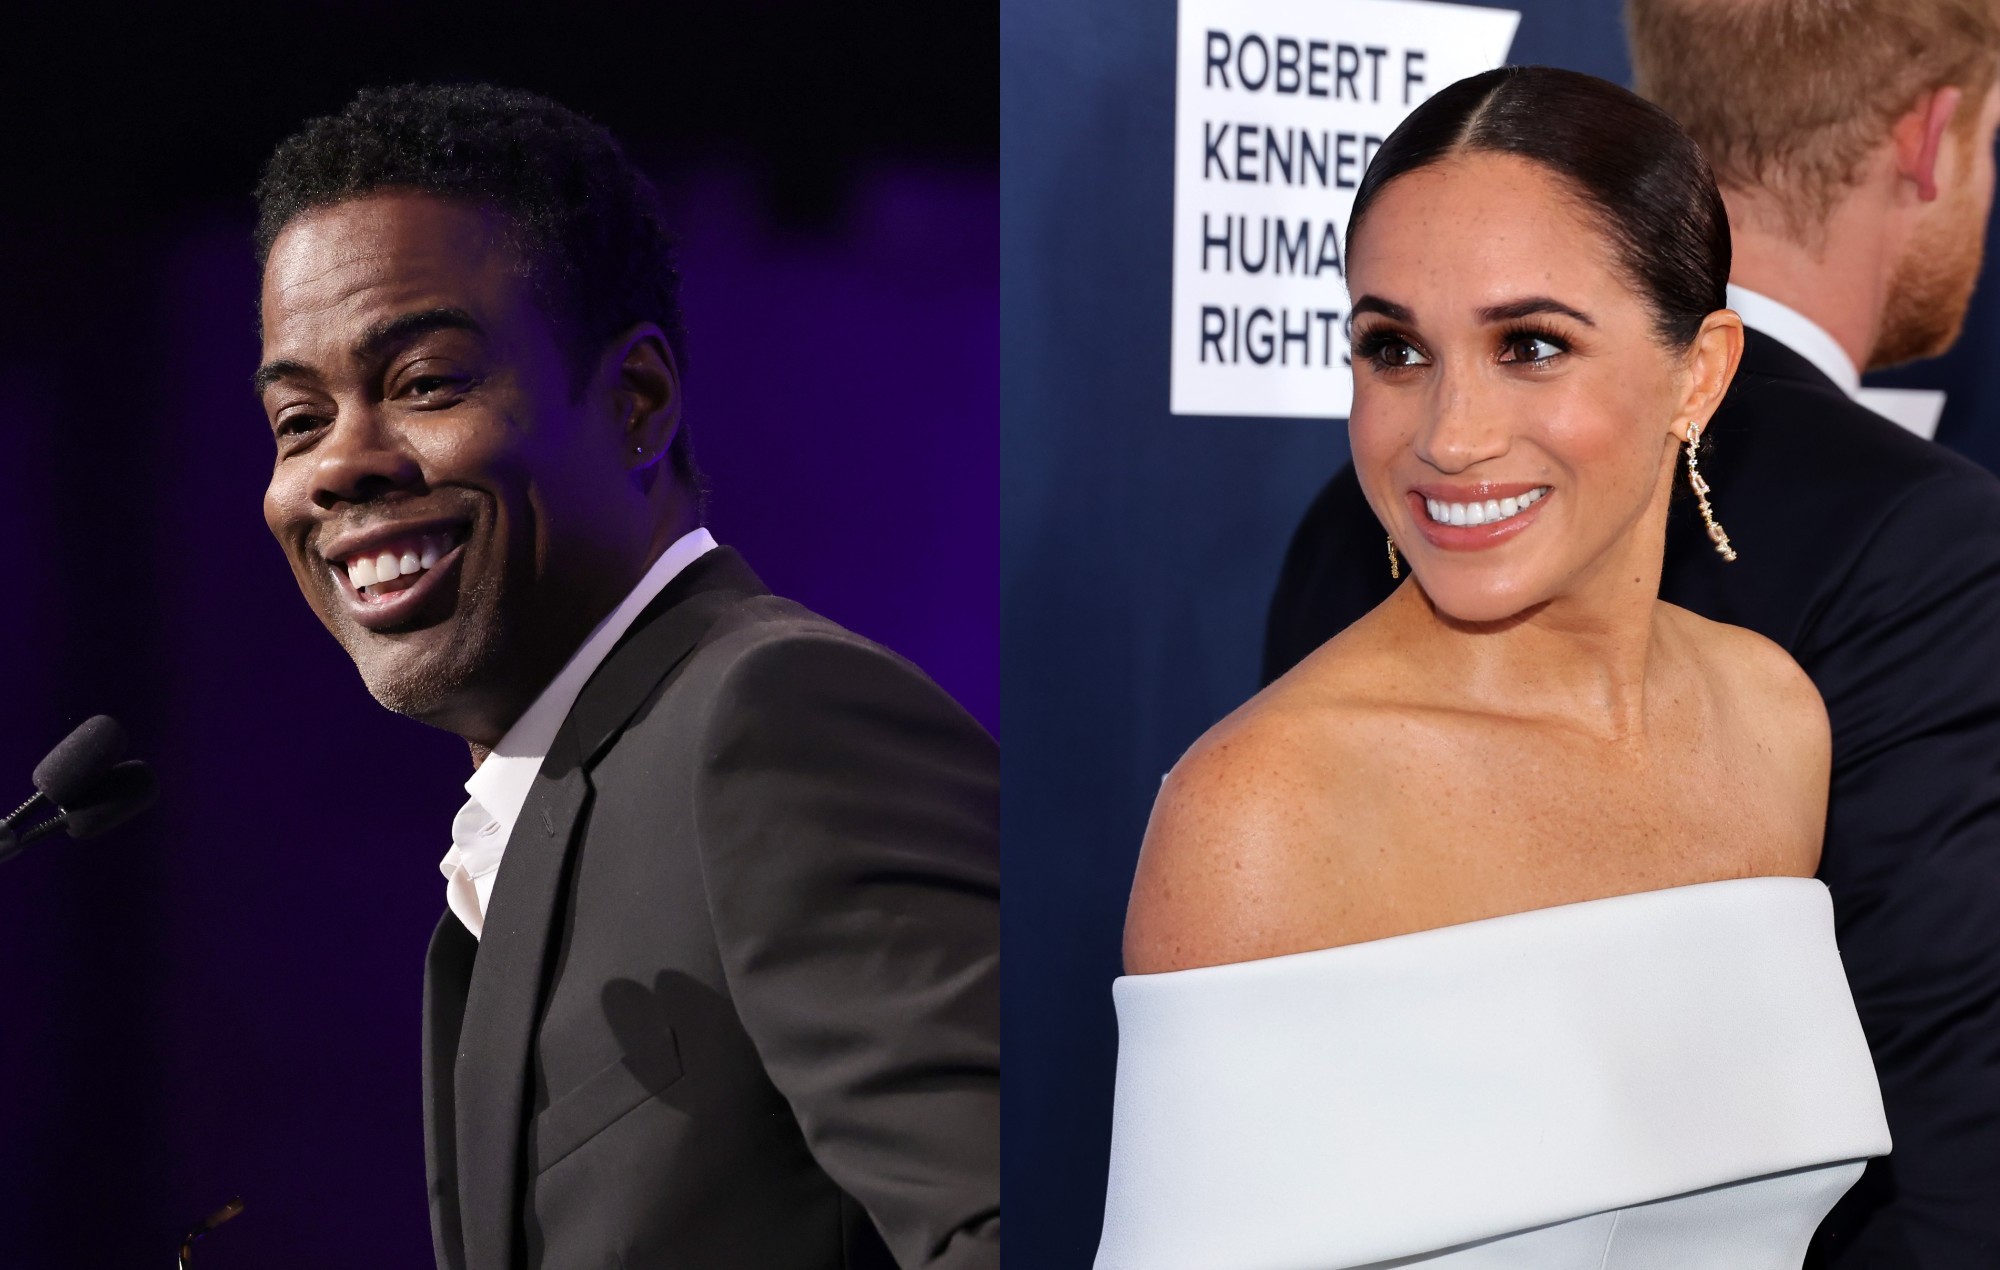 Chris Rock criticises Meghan Markle over Royal Family racism claims